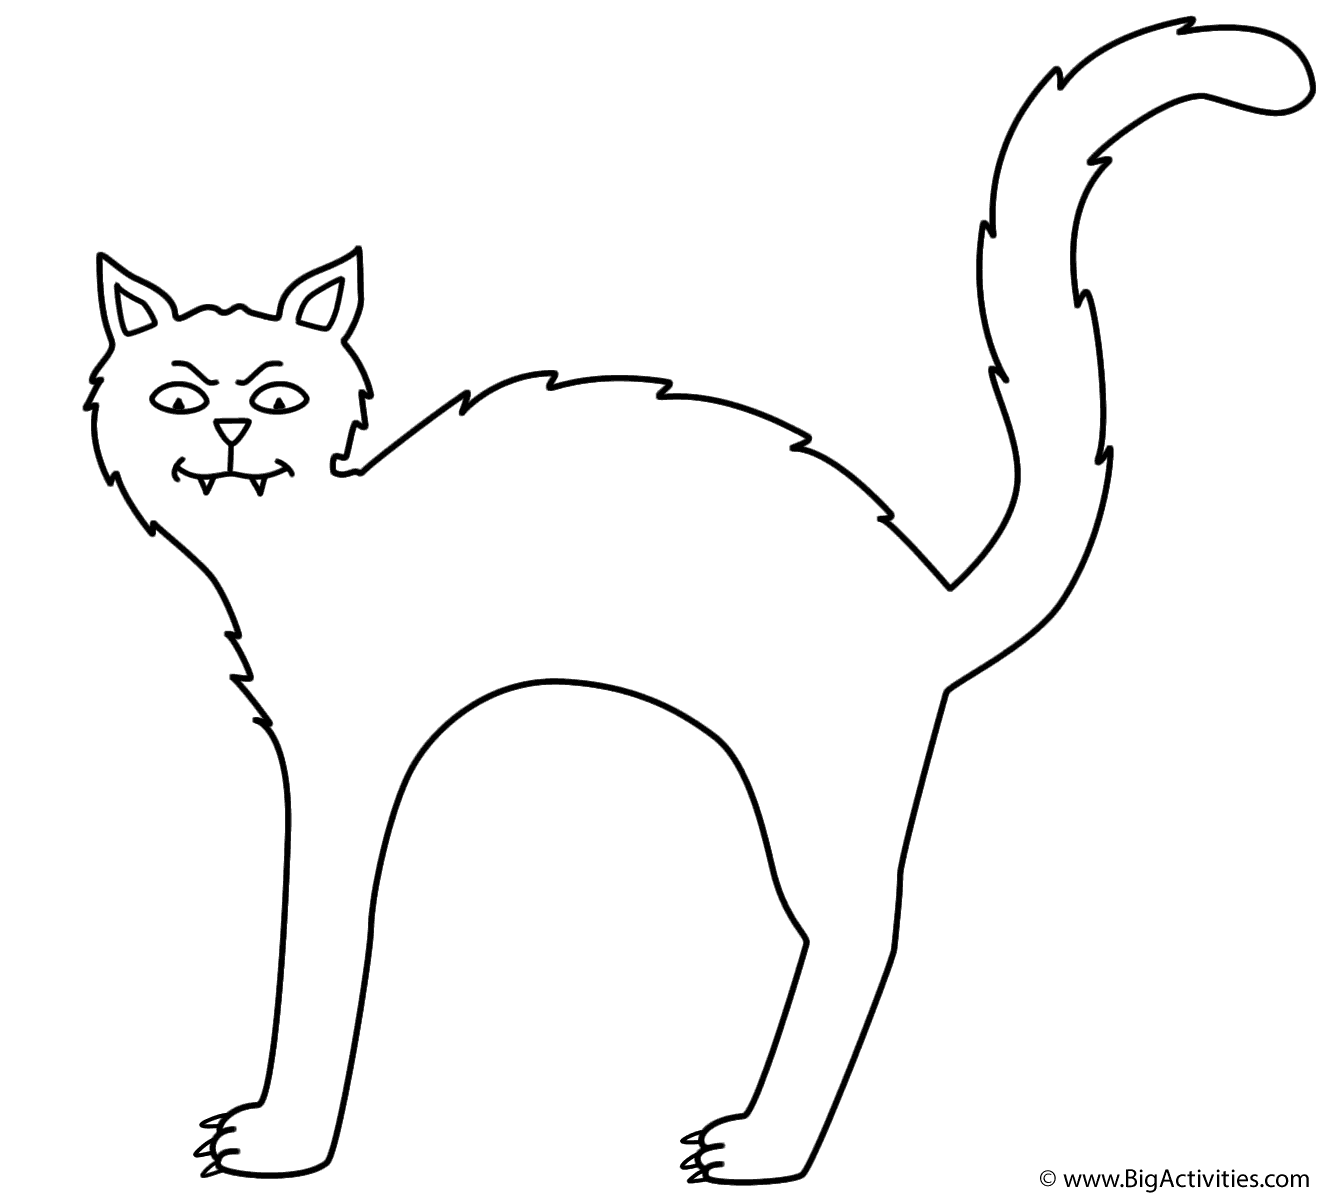 Black cat  Coloring  Page  Halloween  